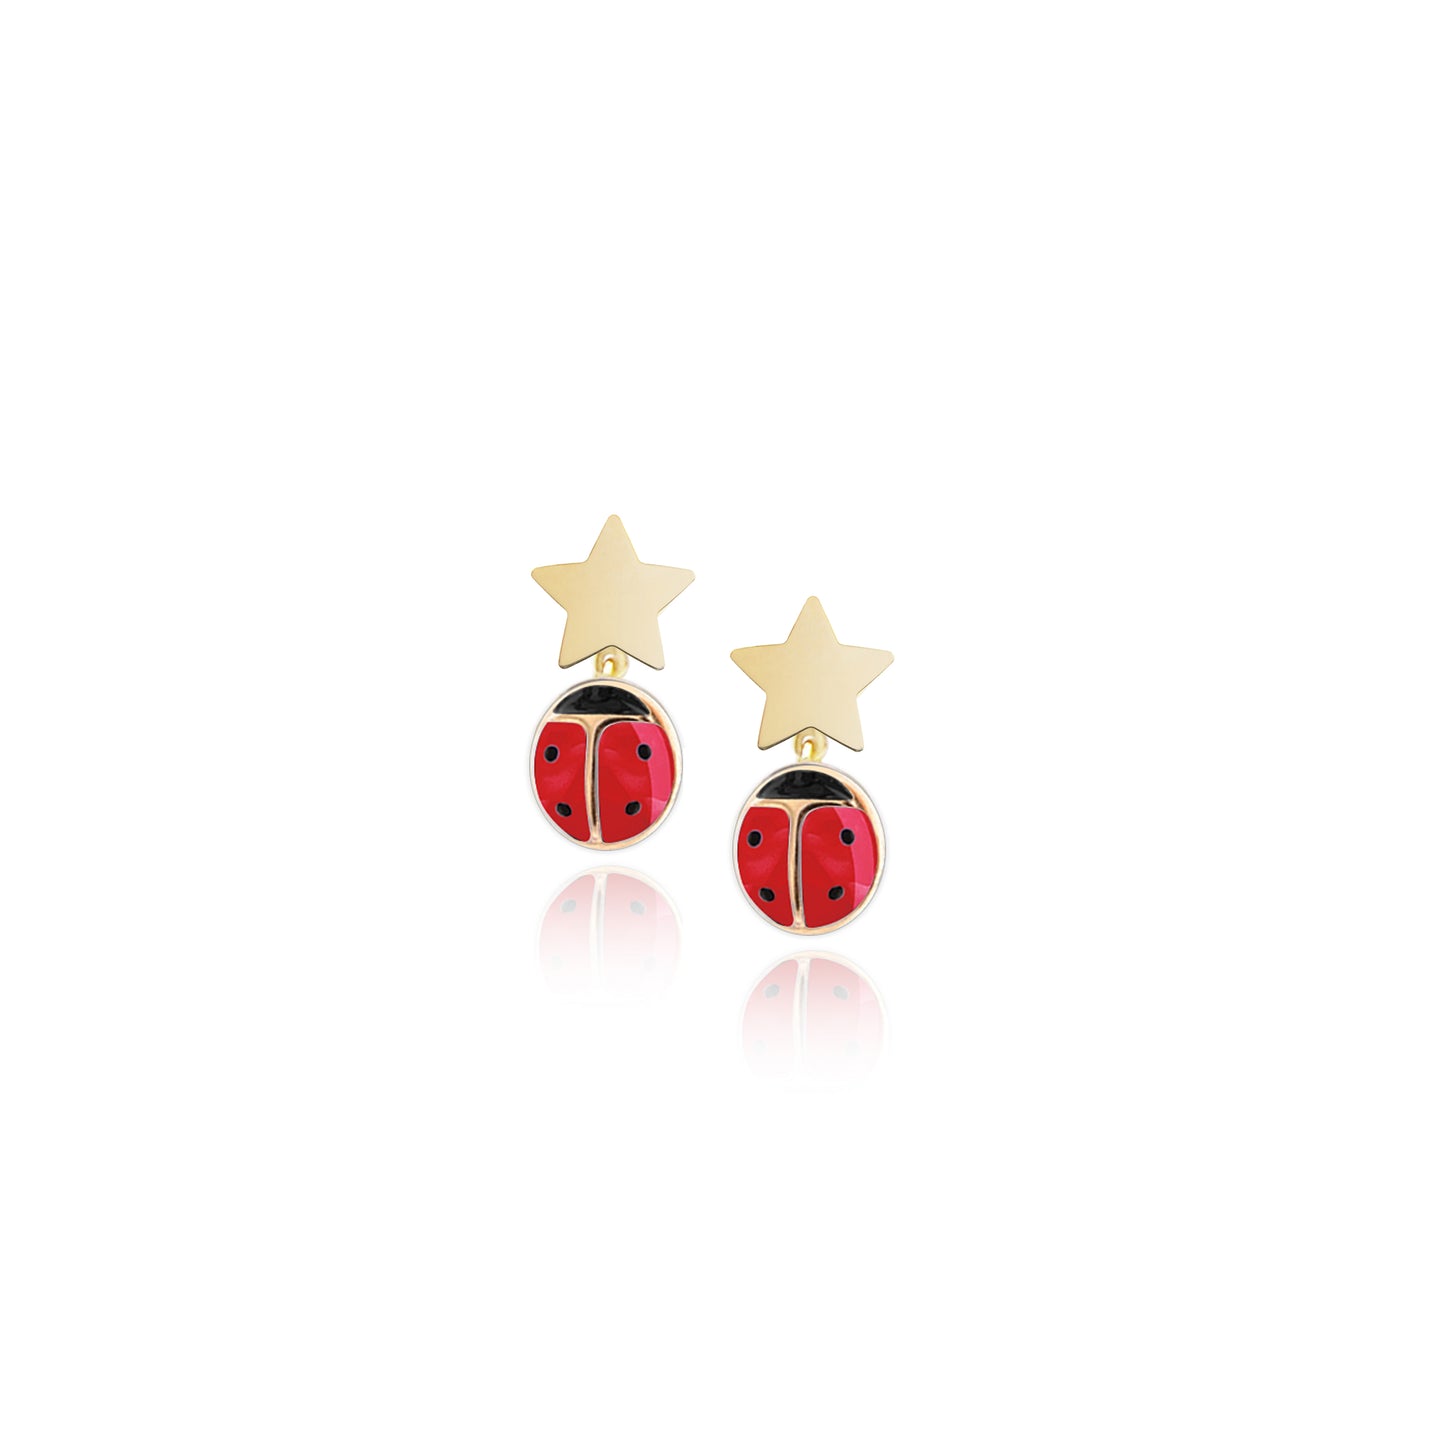 Ladybug Star Earrings in Real Gold